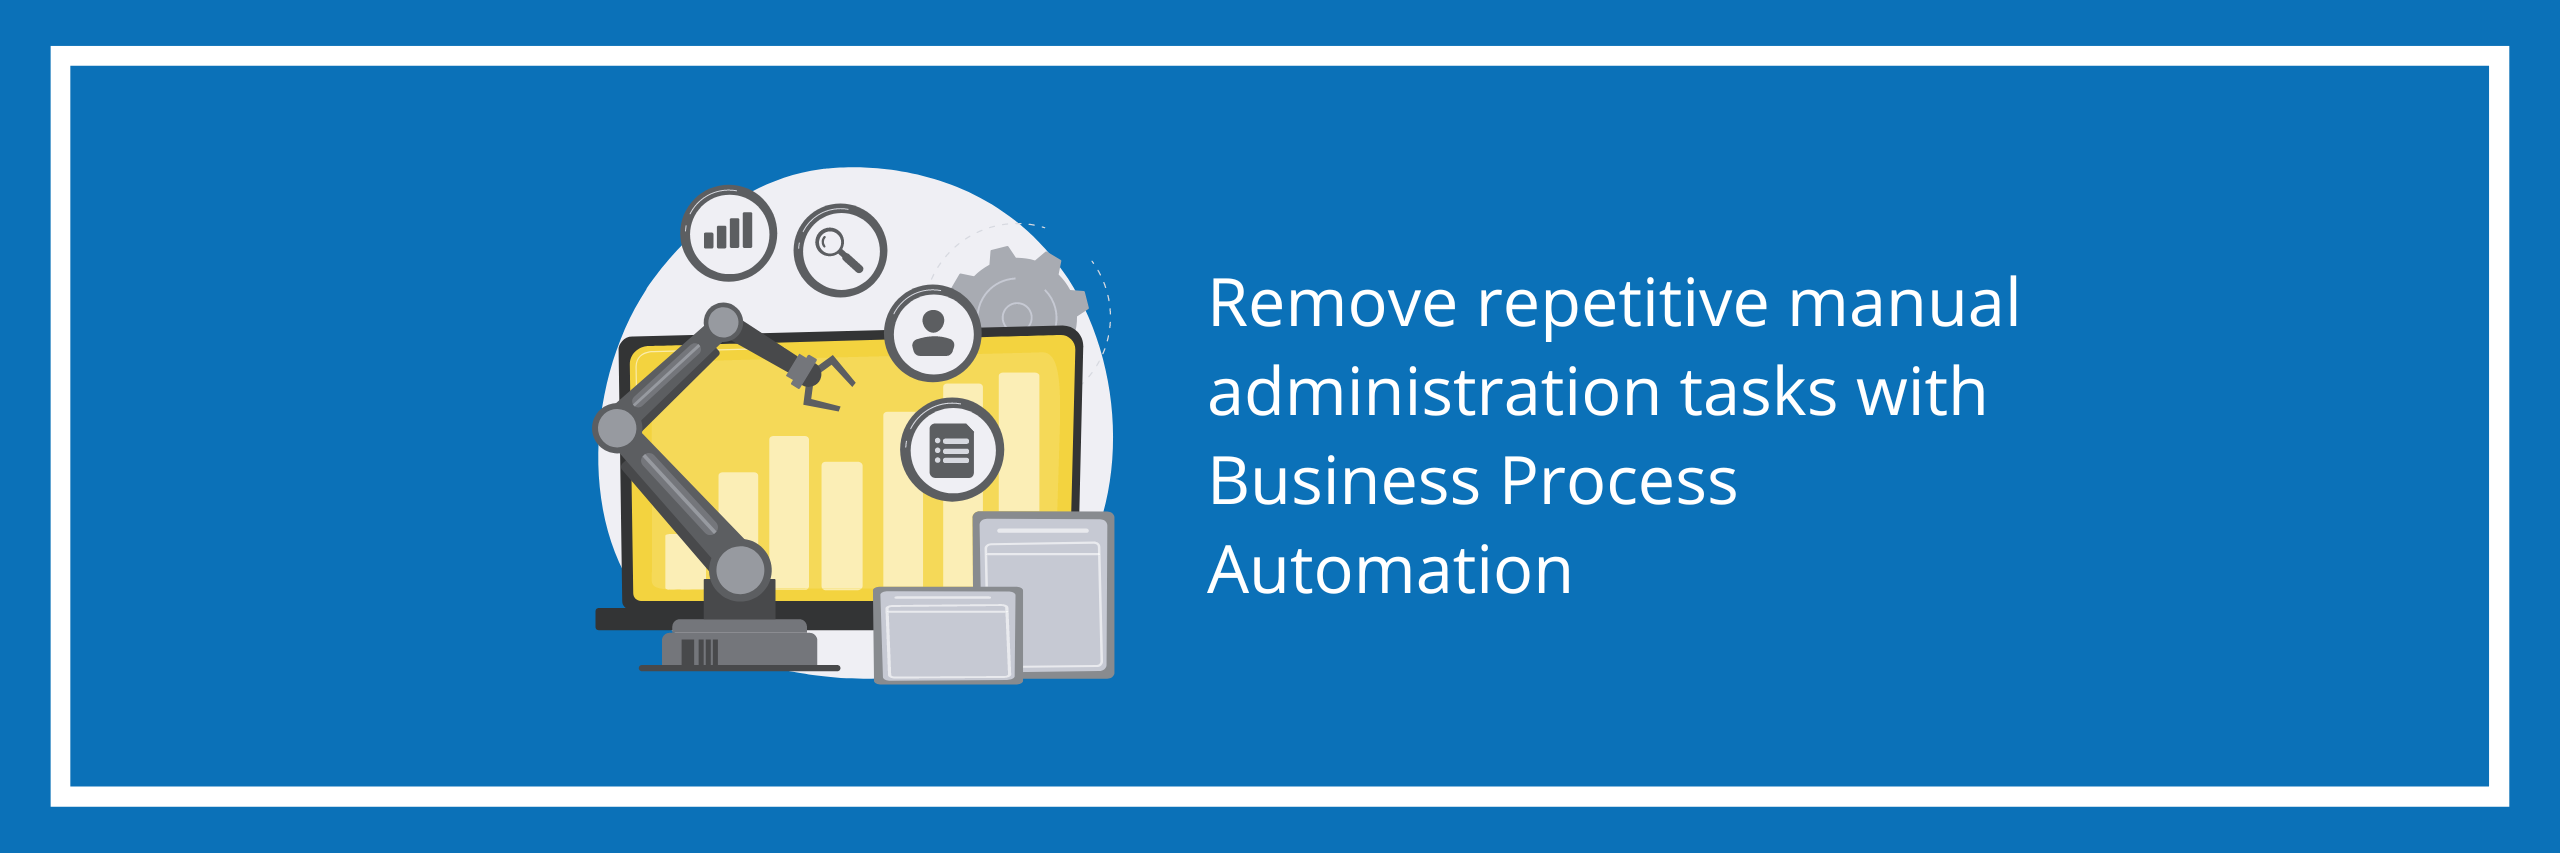 Remove repetitive manual administration tasks with Business Process Automation